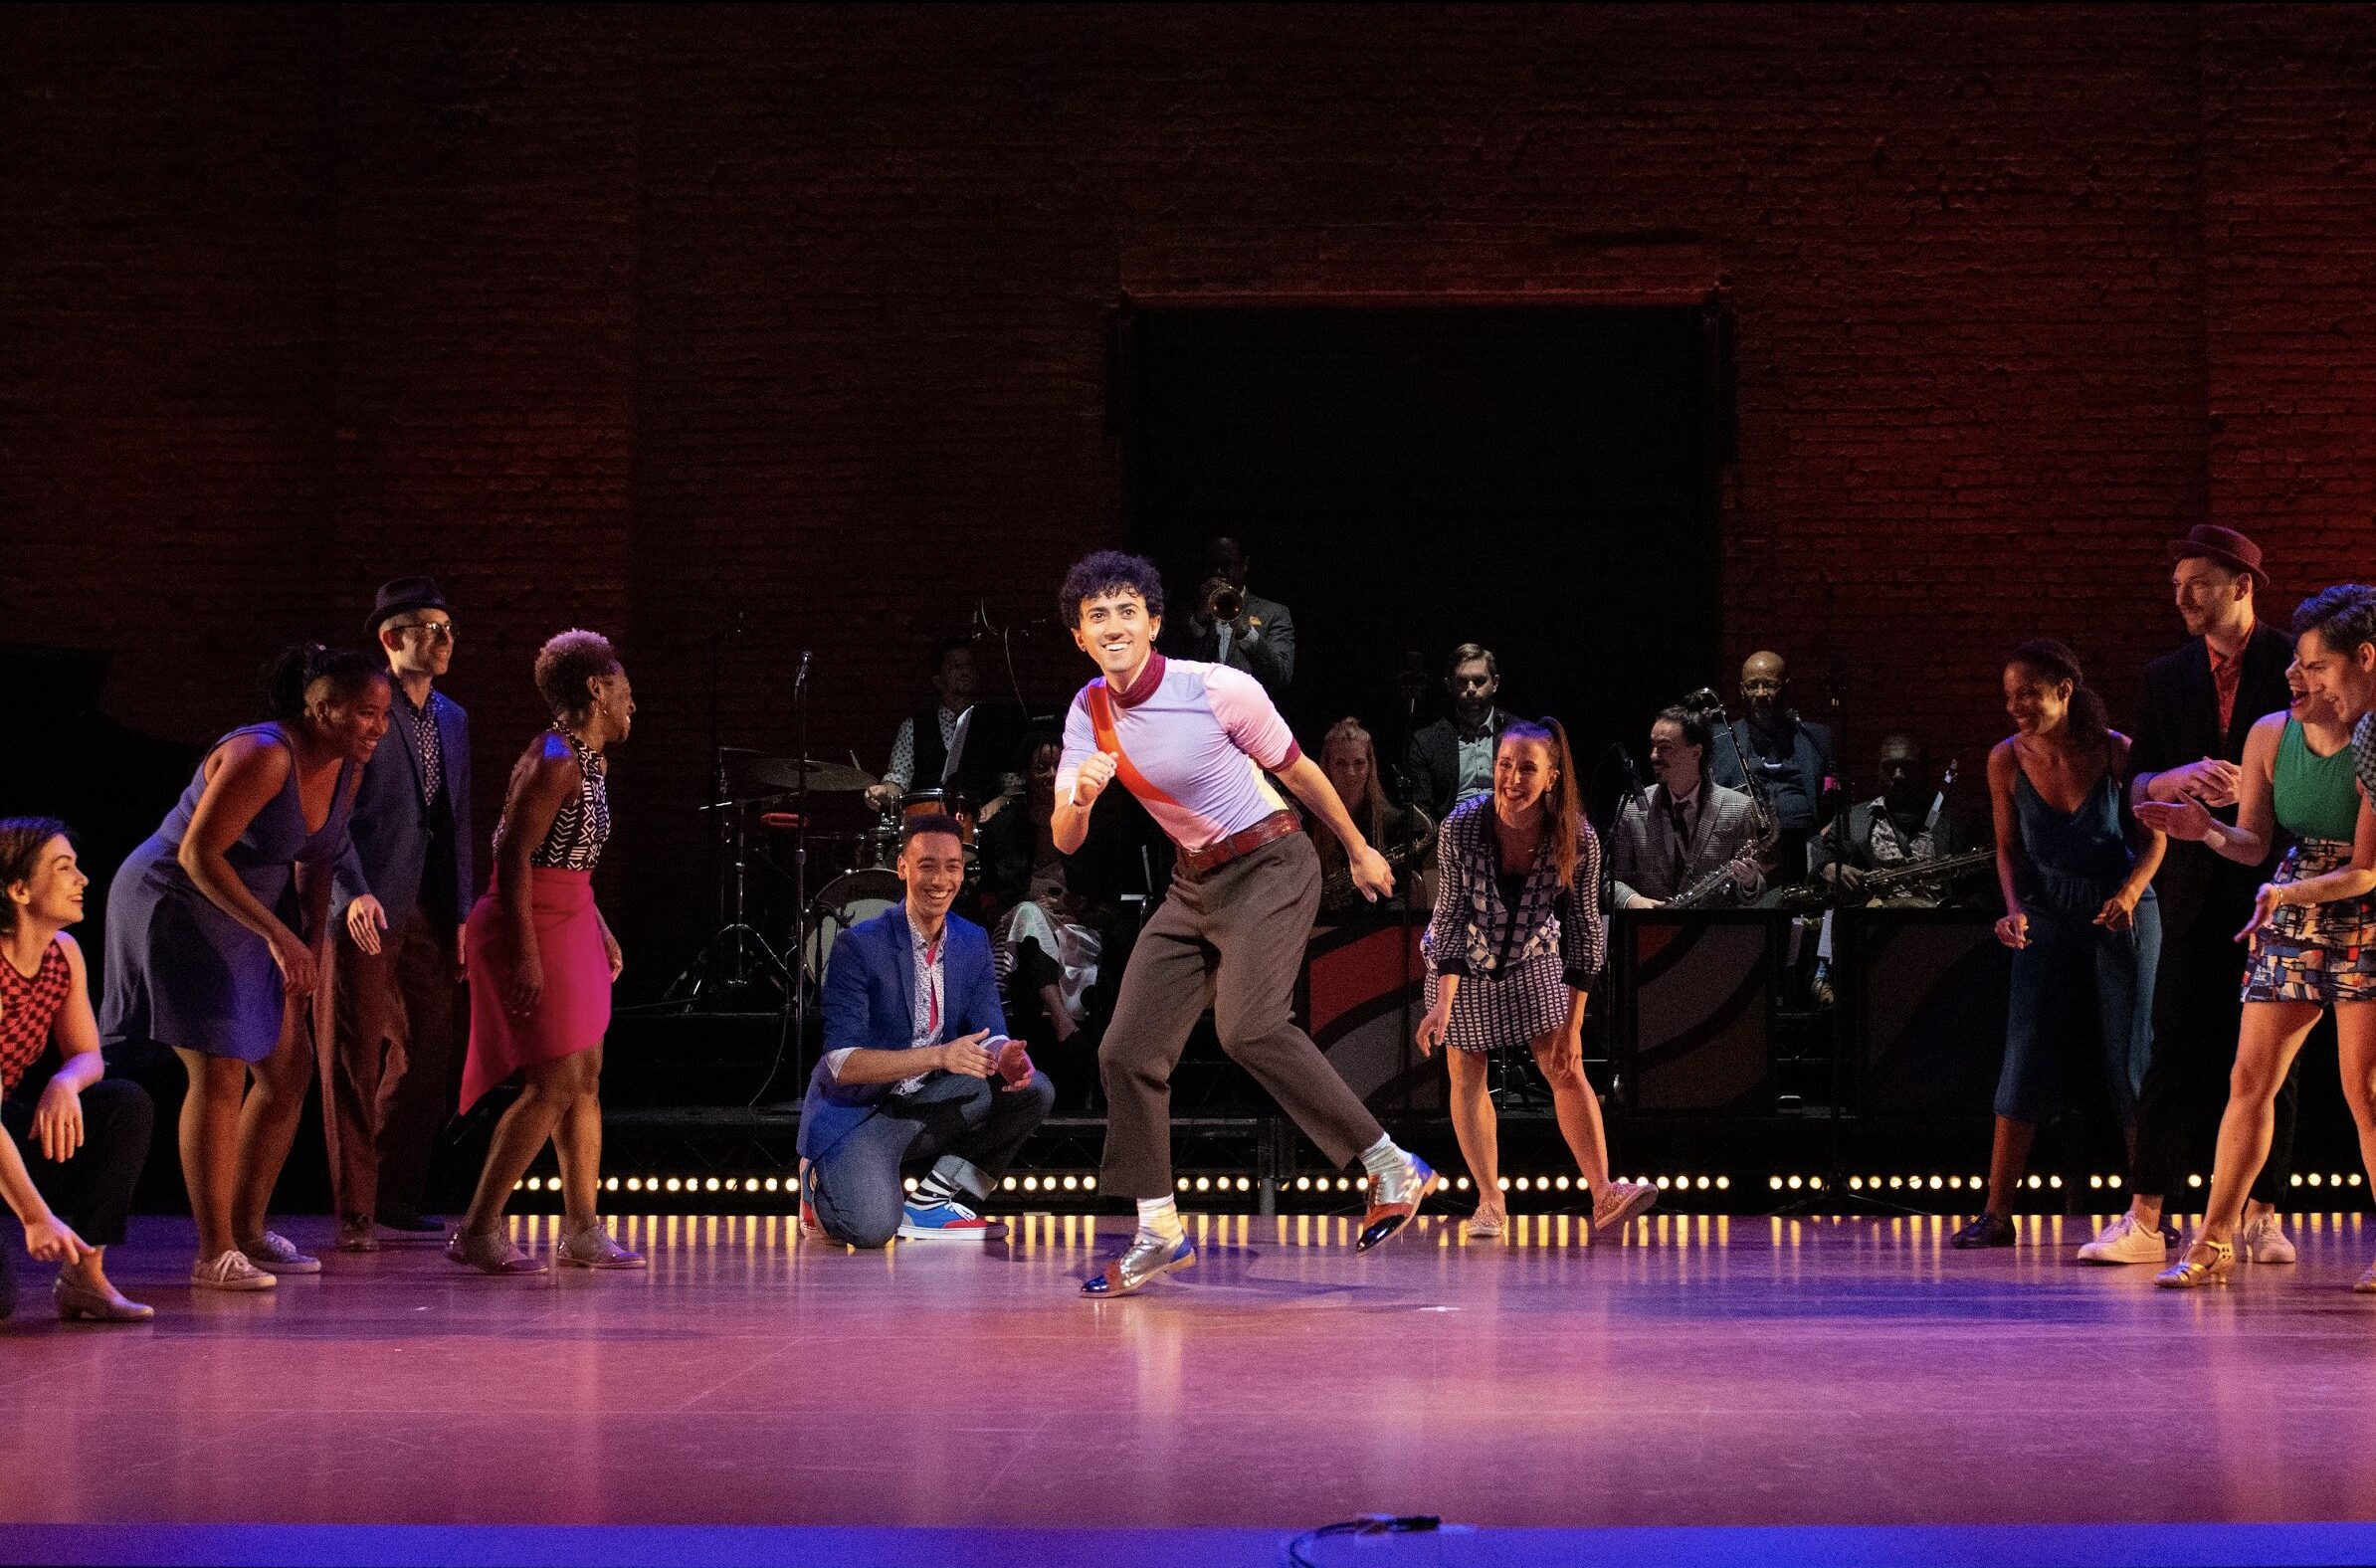 Caleb Teicher dancing on stage with dancers onlooking